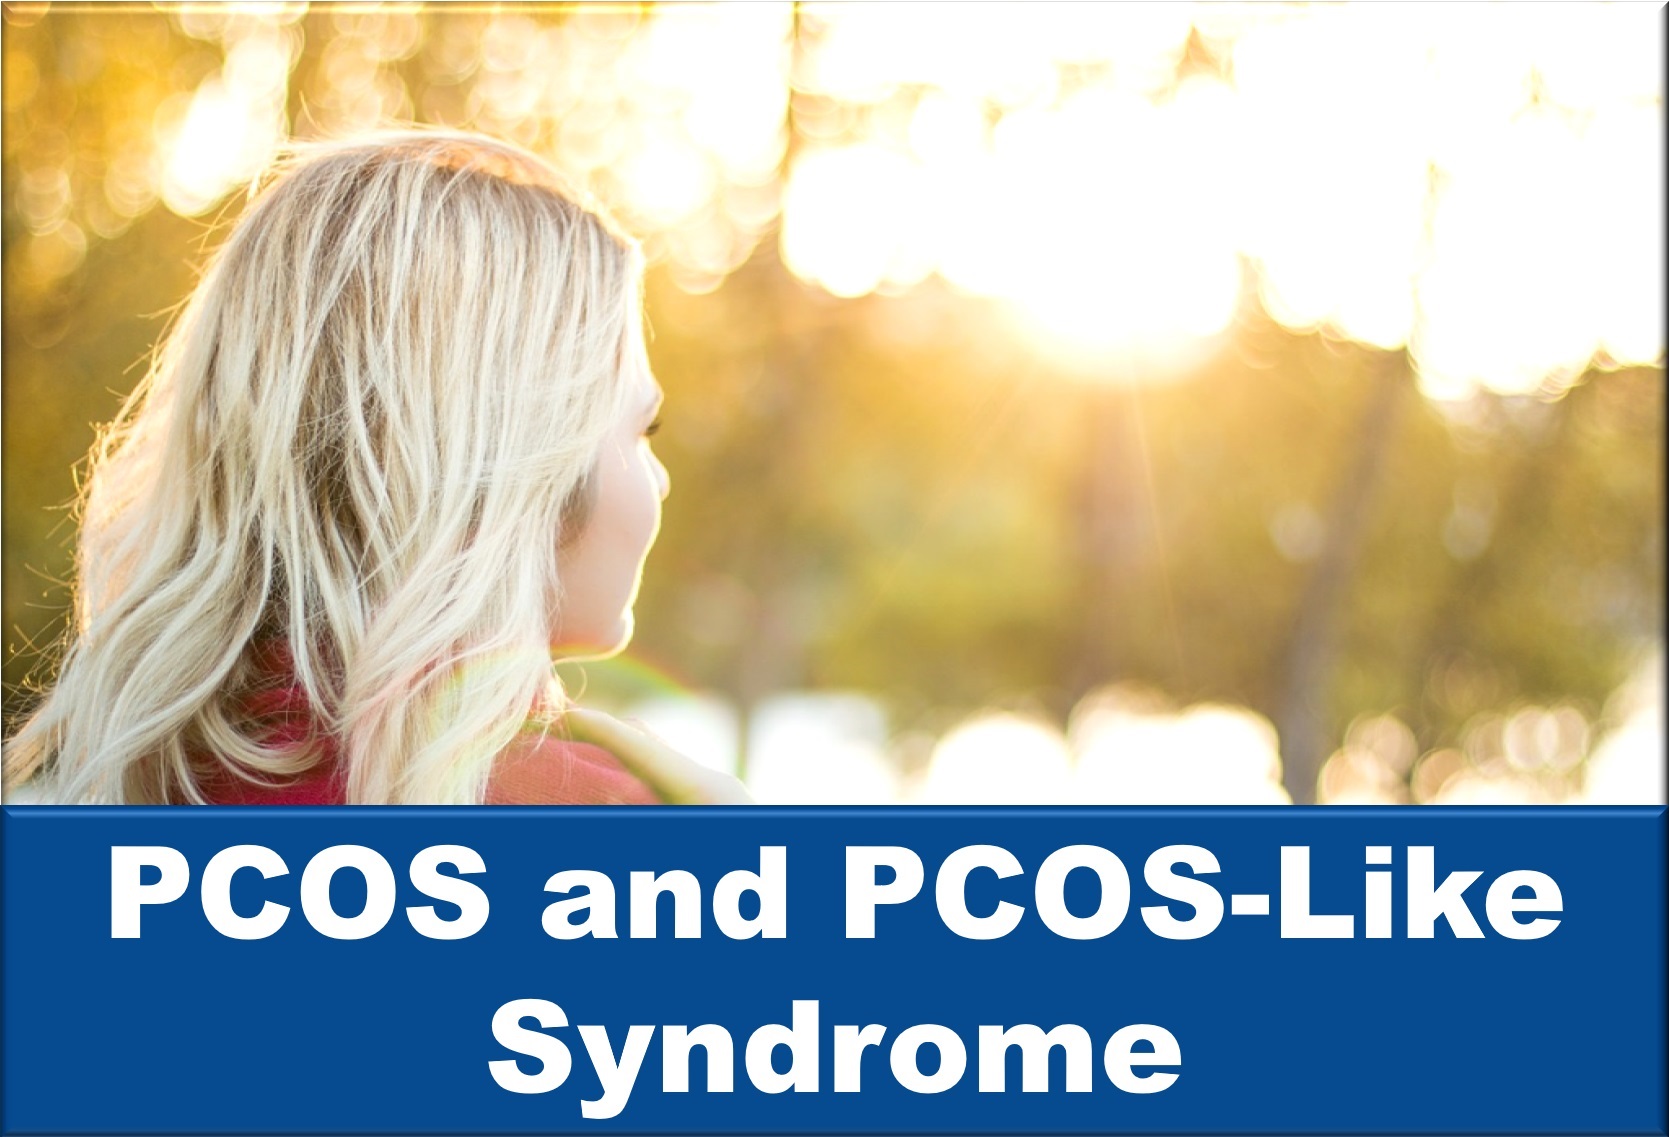 PCOS and PCOS-like Syndrome